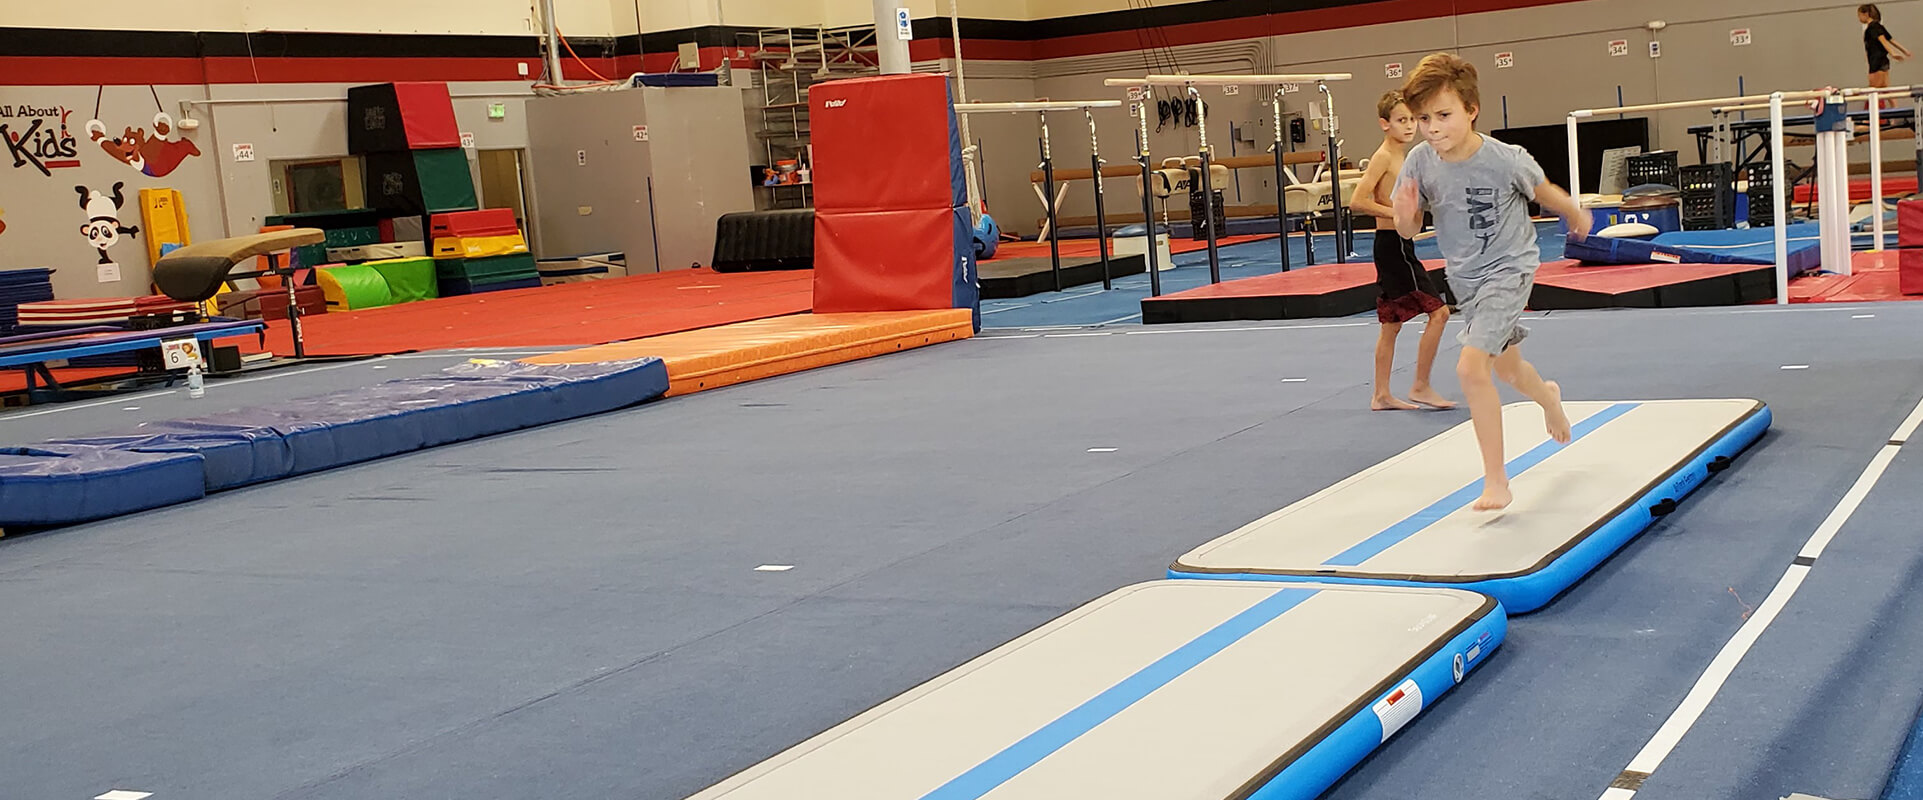 lindre zone Miniature AirTrack vs Tumbling Track Mats | AirTrack US